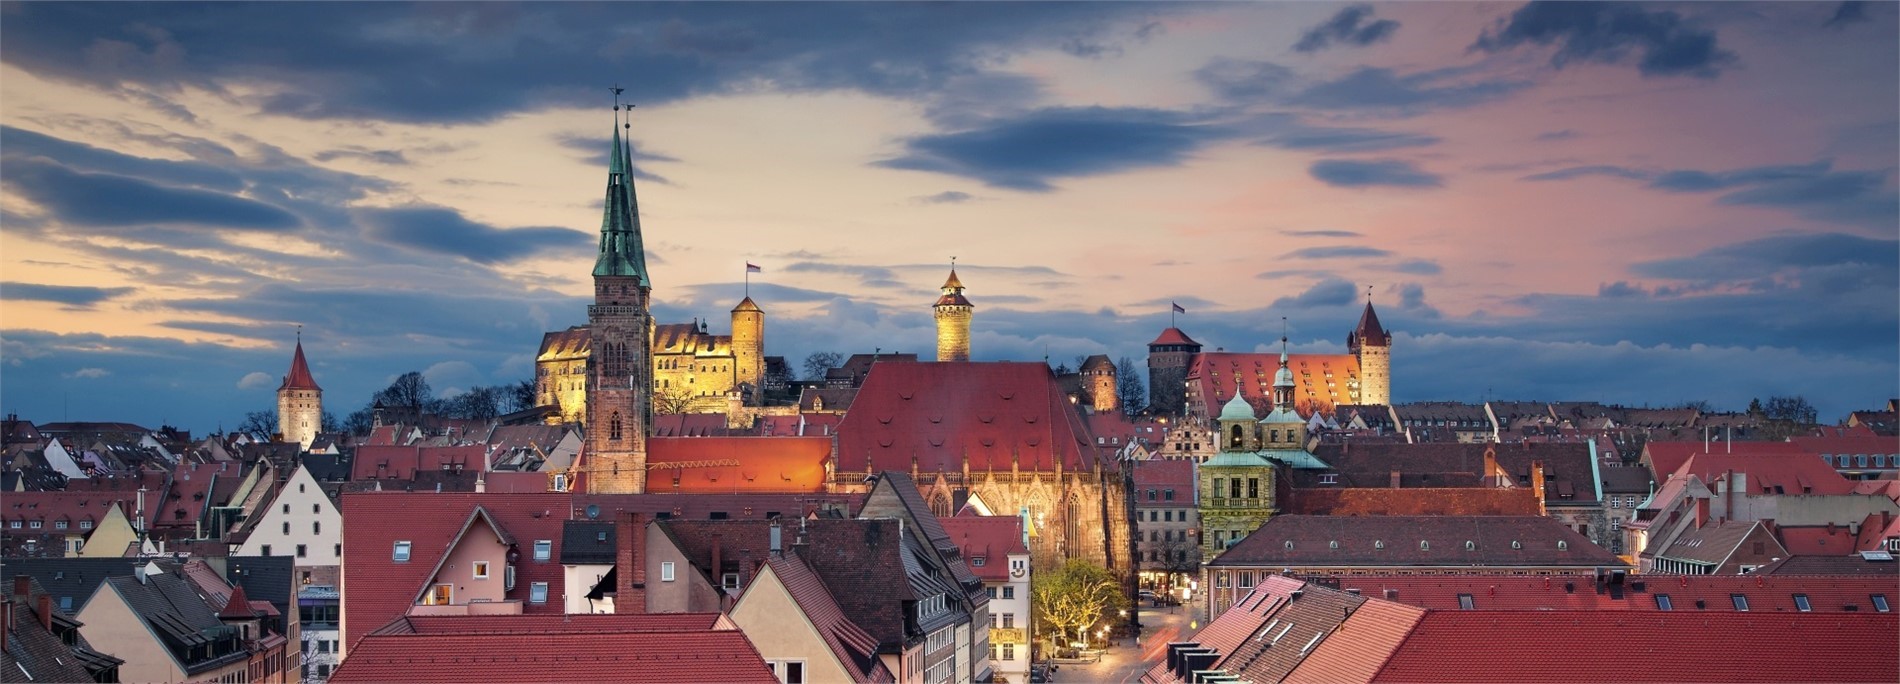 Hotels and accommodation in Nuremberg, Germany